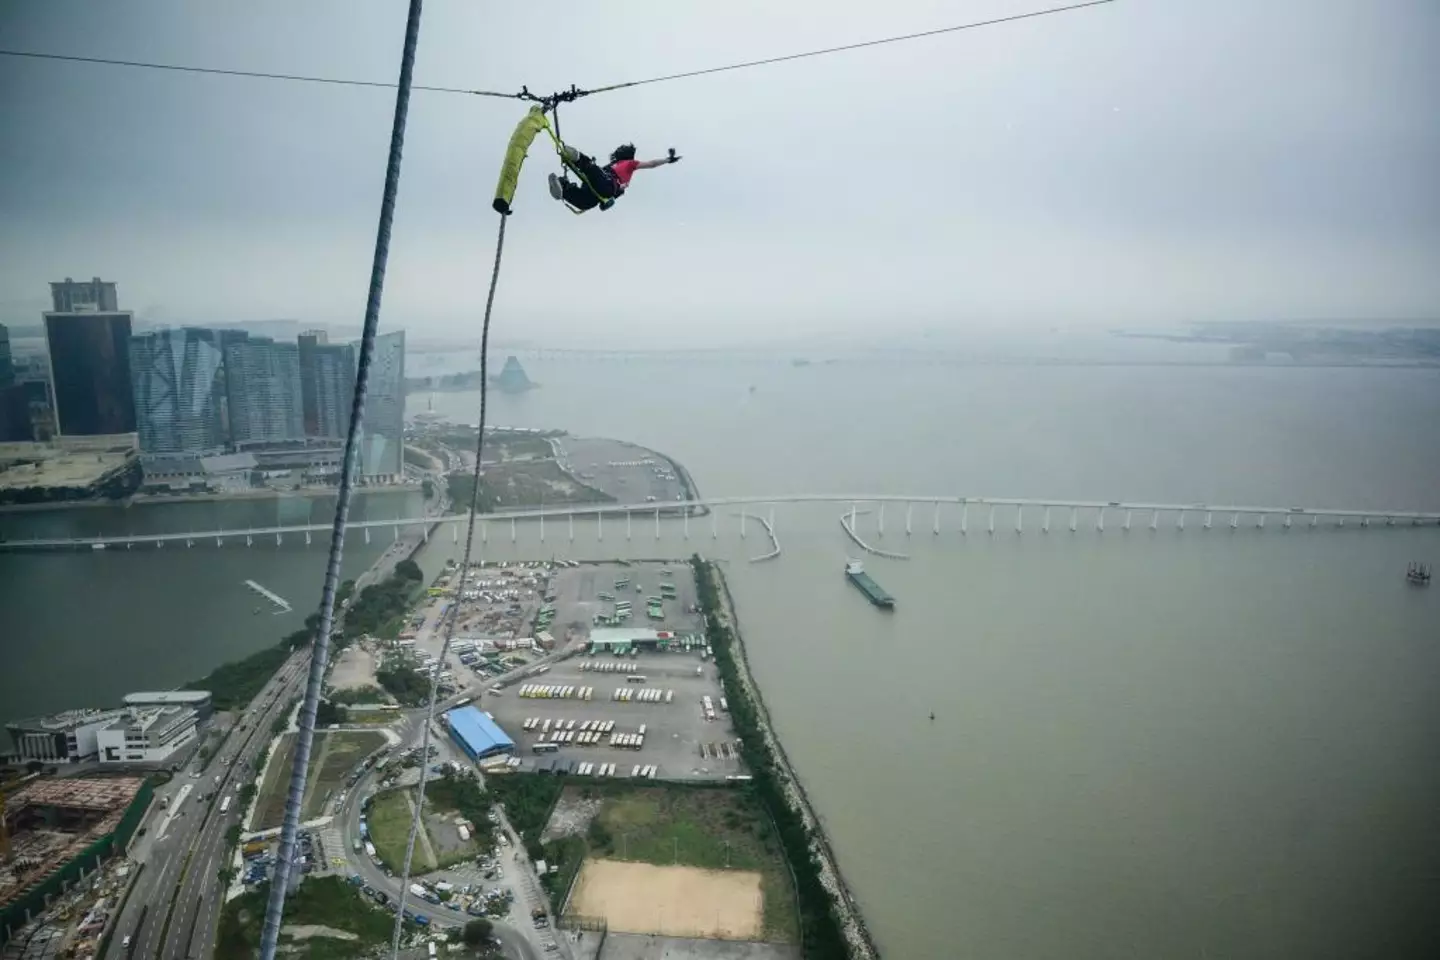 A 56-year-old tourist sadly died after doing the world's highest bungee jump.